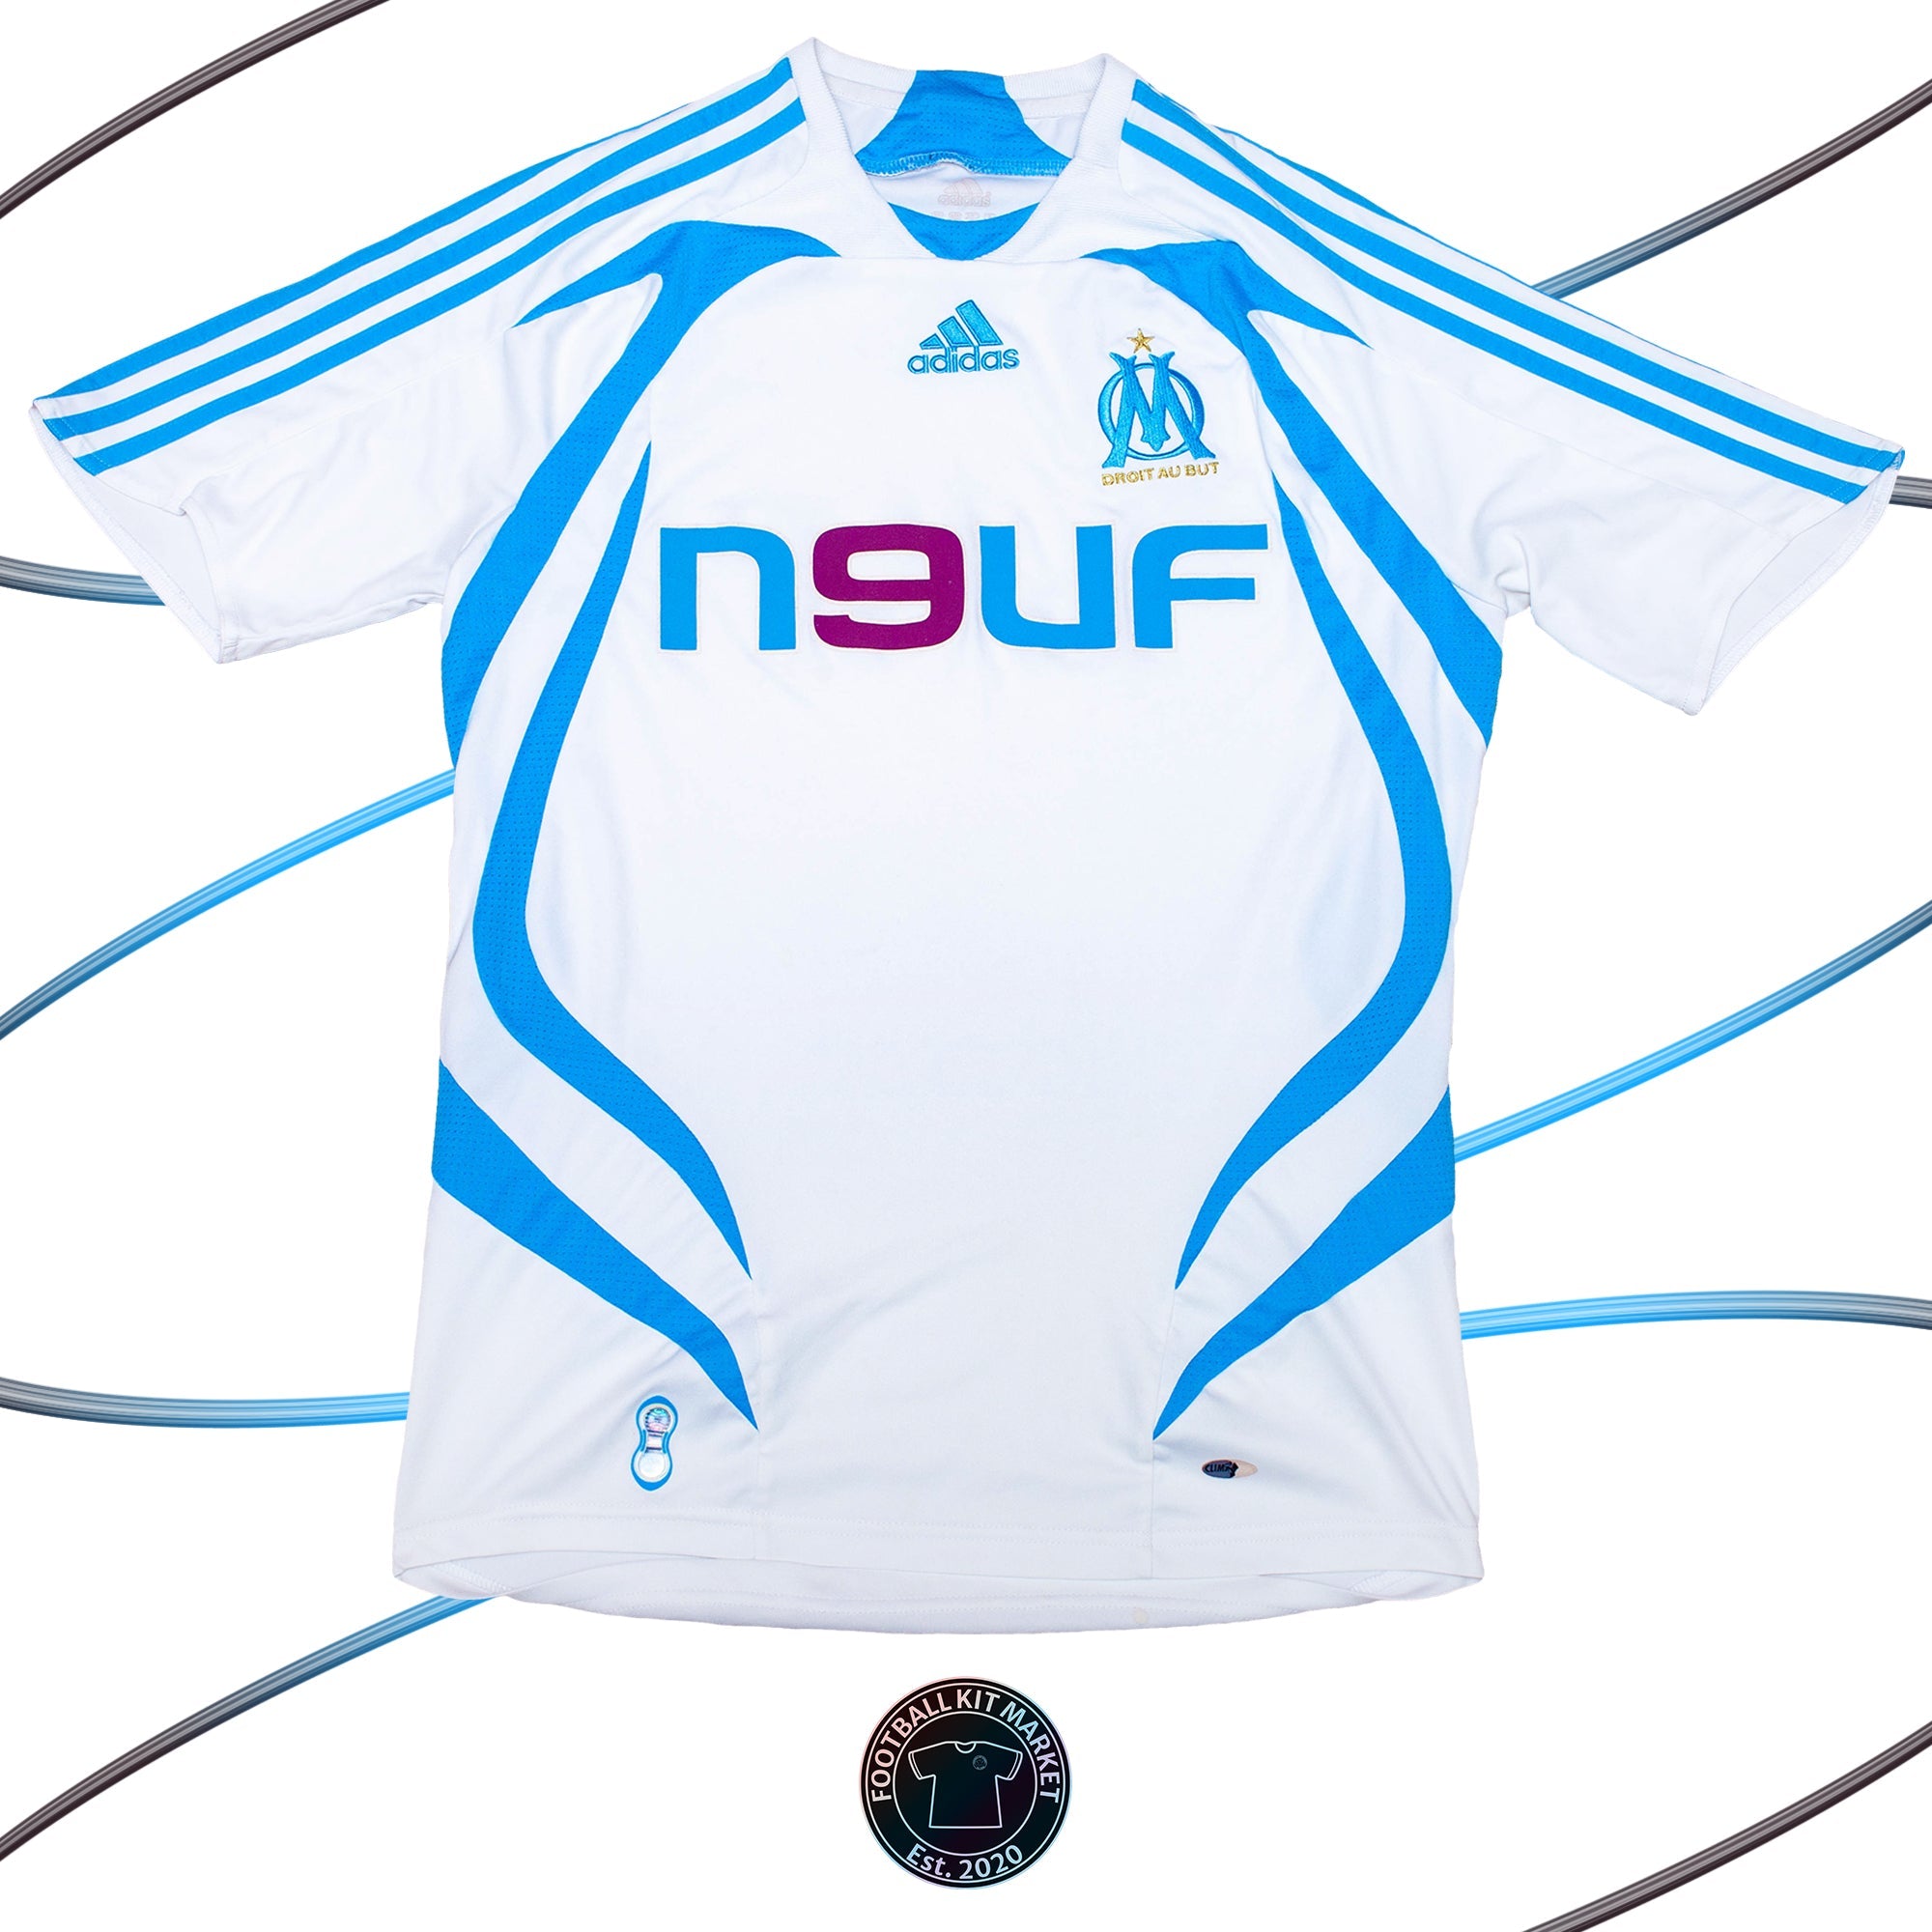 Genuine MARSEILLE Home Shirt (2007-2008) - ADIDAS (S) - Product Image from Football Kit Market